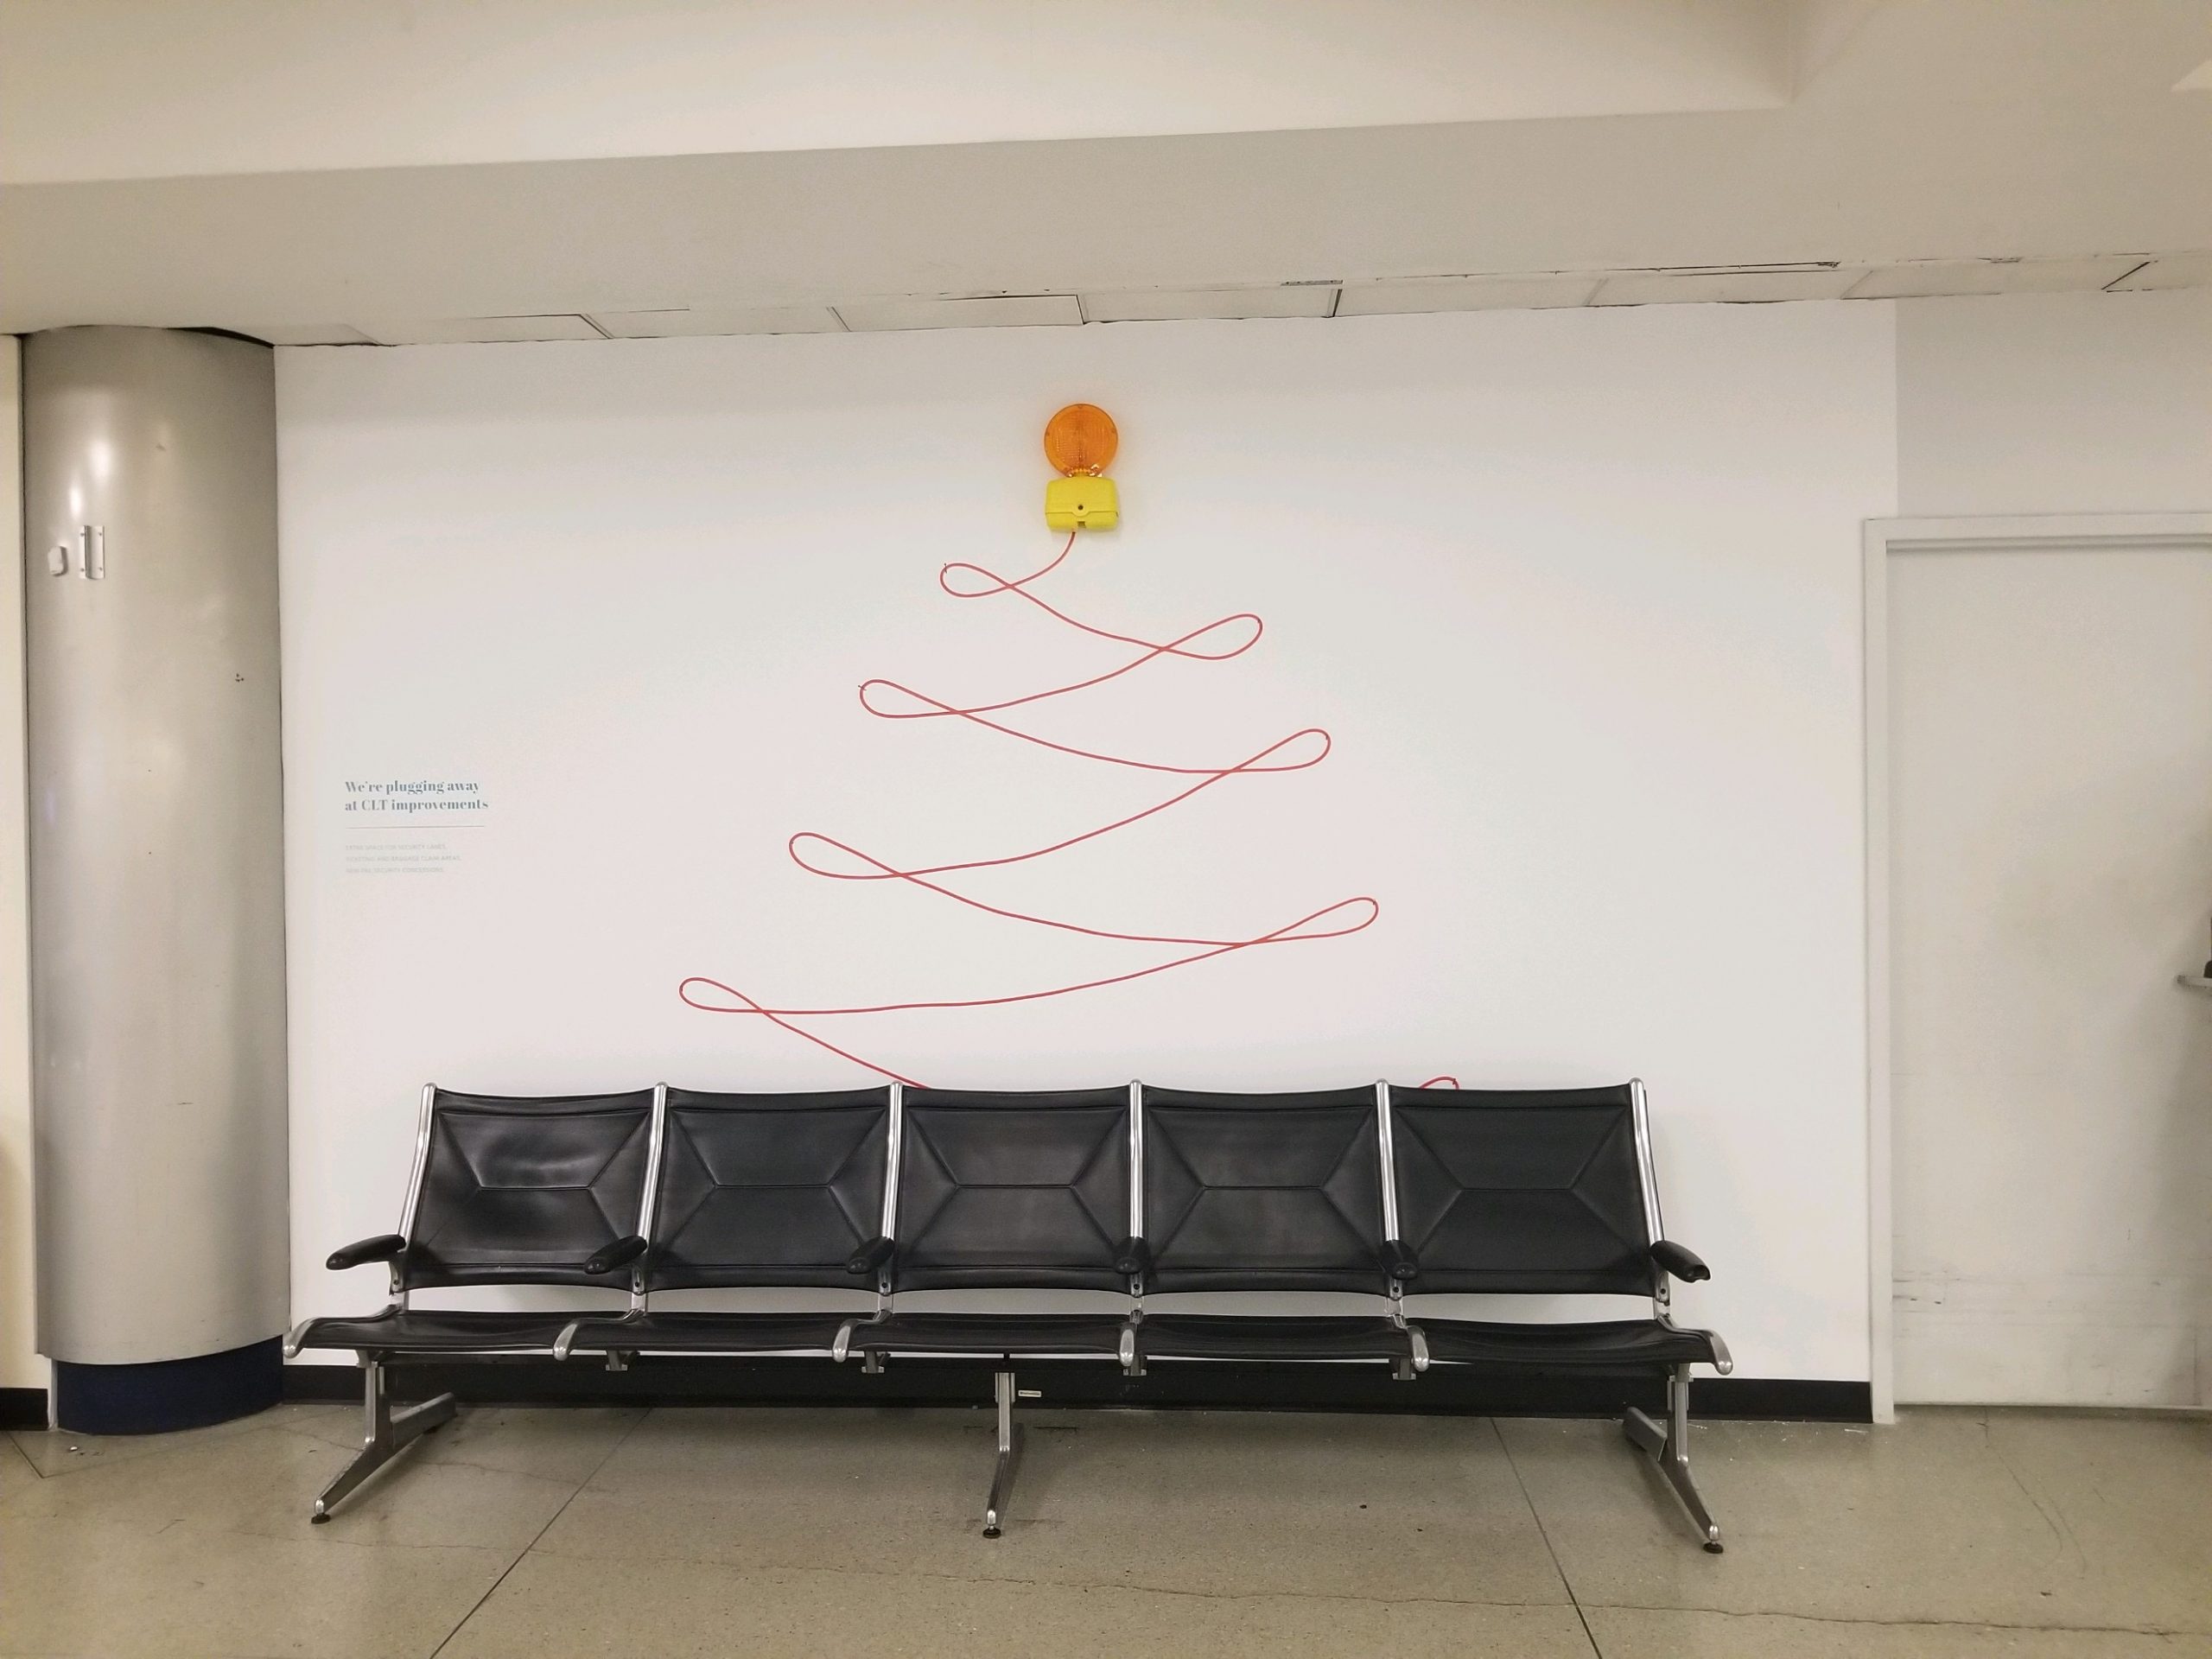 CLT Airport Holiday Displays